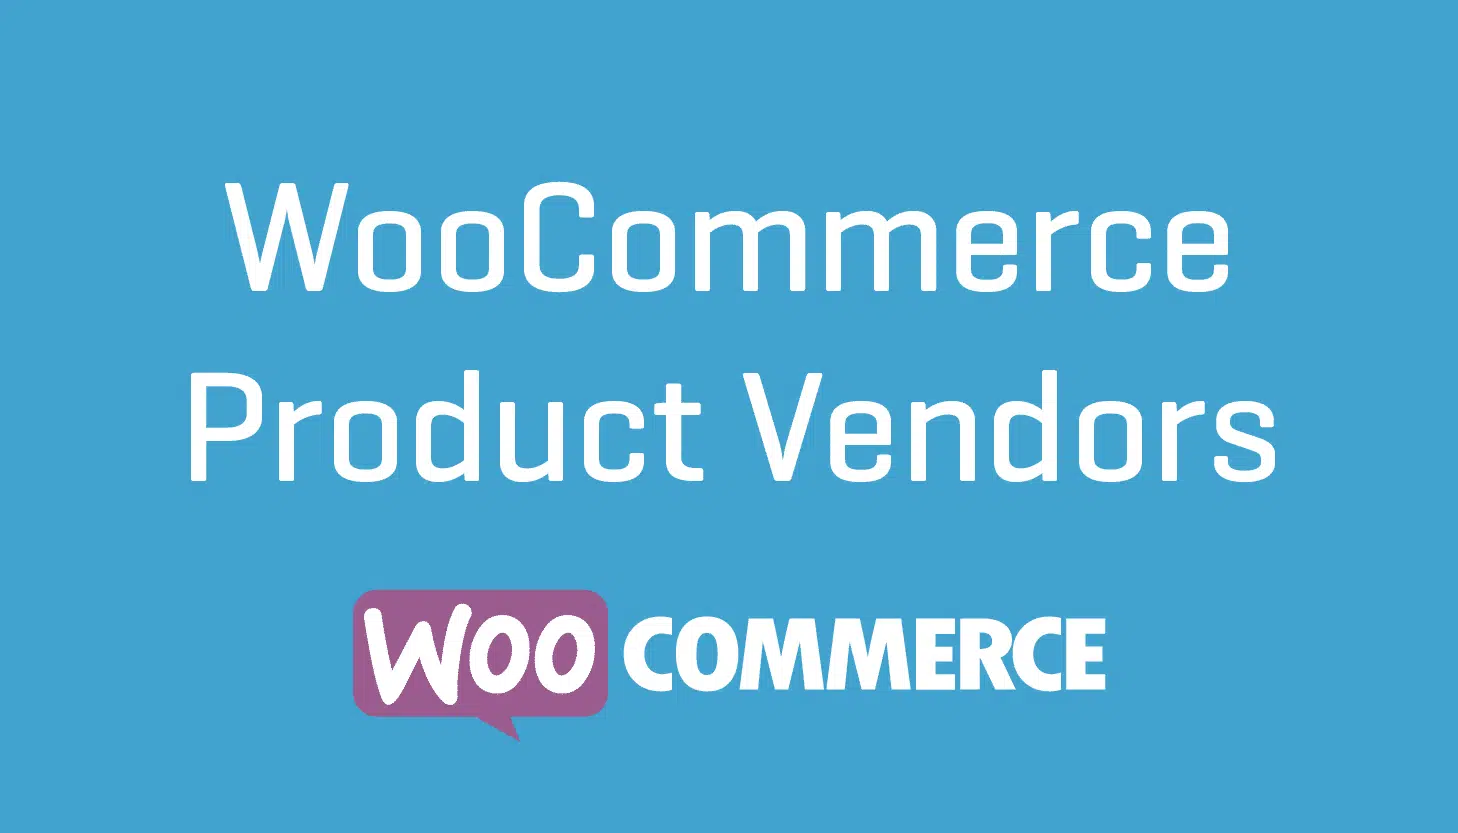 Product Vendors for WooCommerce